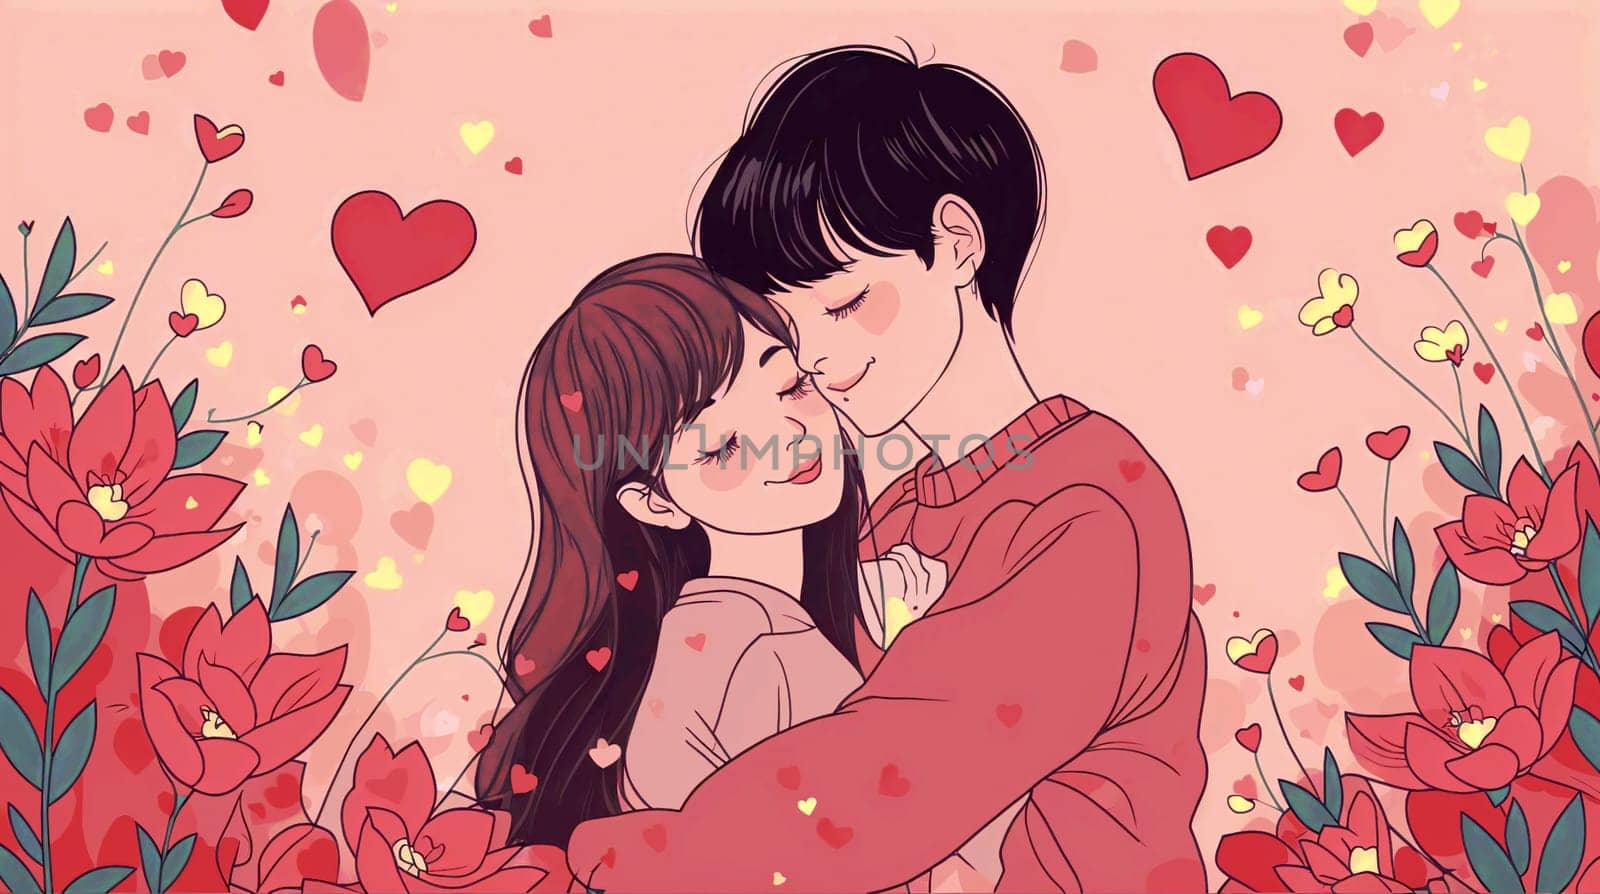 Young couple illustration hugging among hearts and flowers - Valentine's day by chrisroll